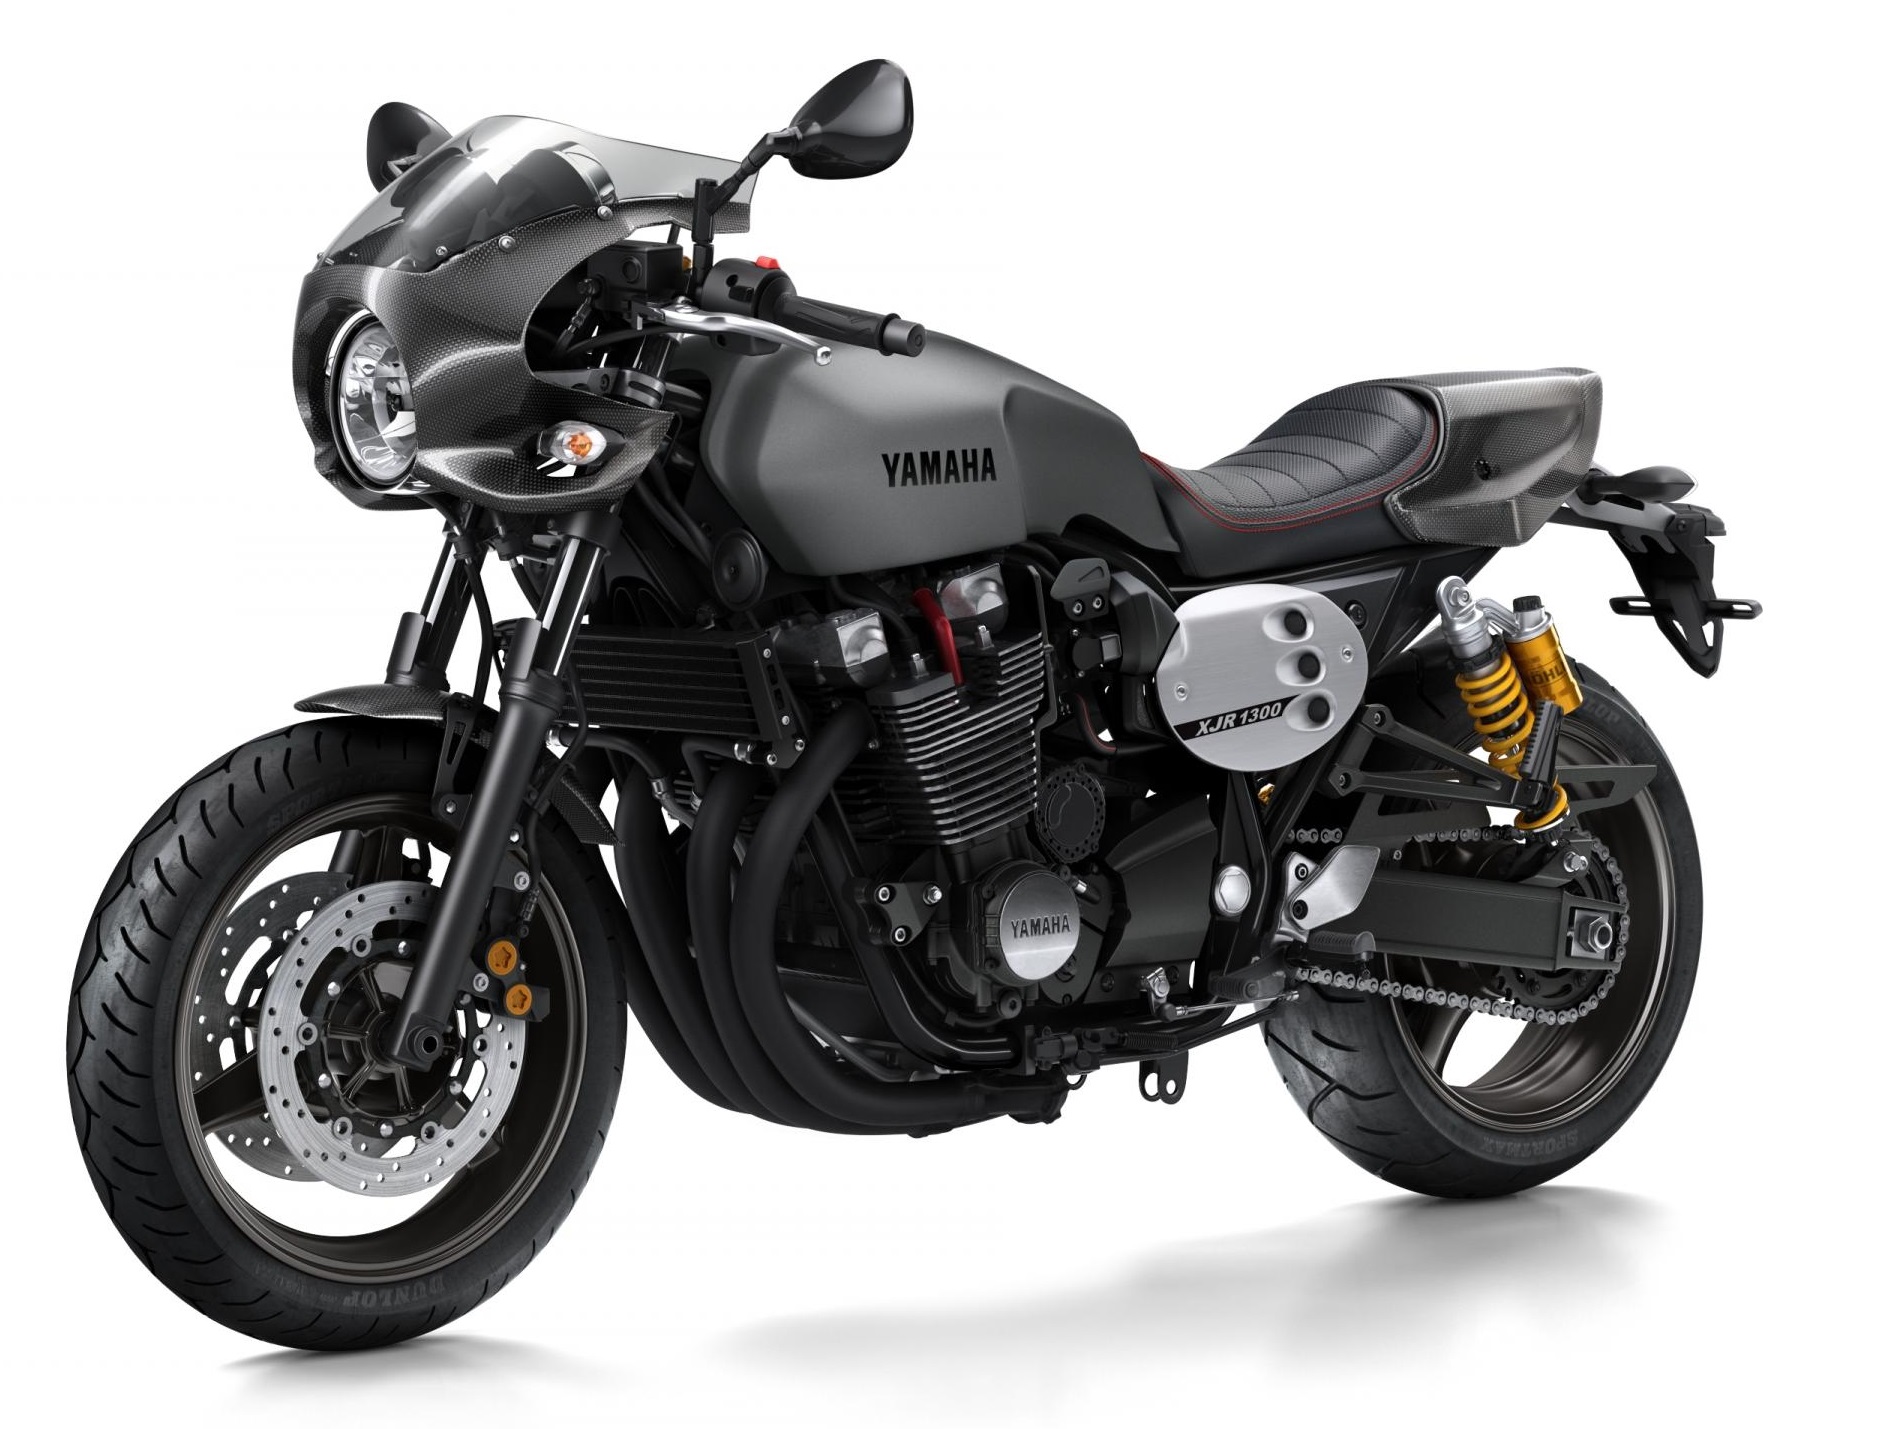 yamaha xjr1300 for sale